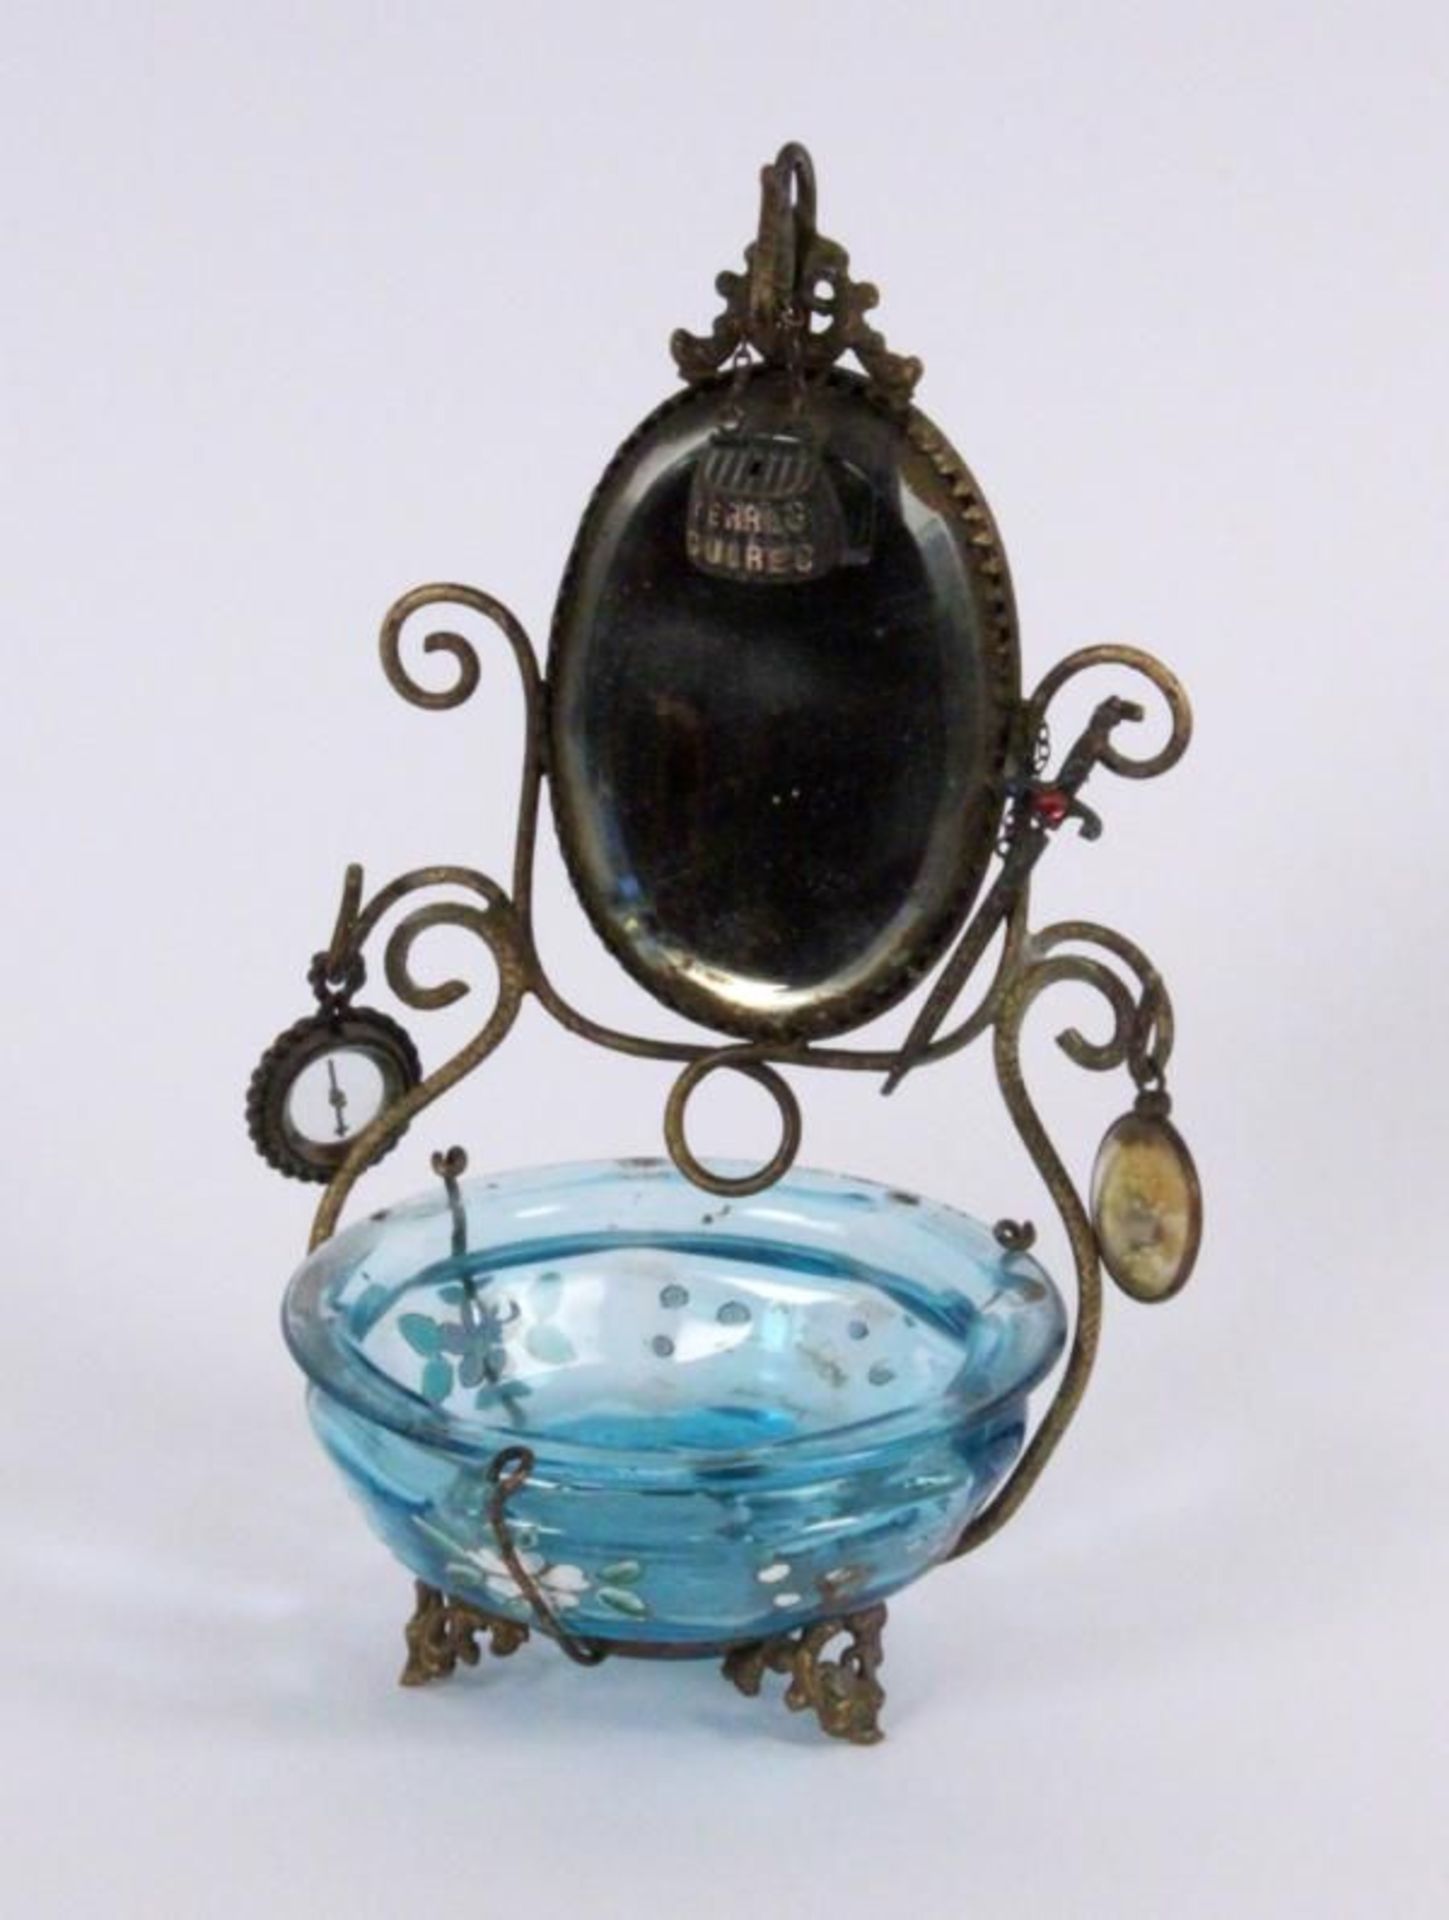 A POCKET WATCH STAND ca. 1900 Brass with blue glass bowl and hangers, height 17cm.    Starting